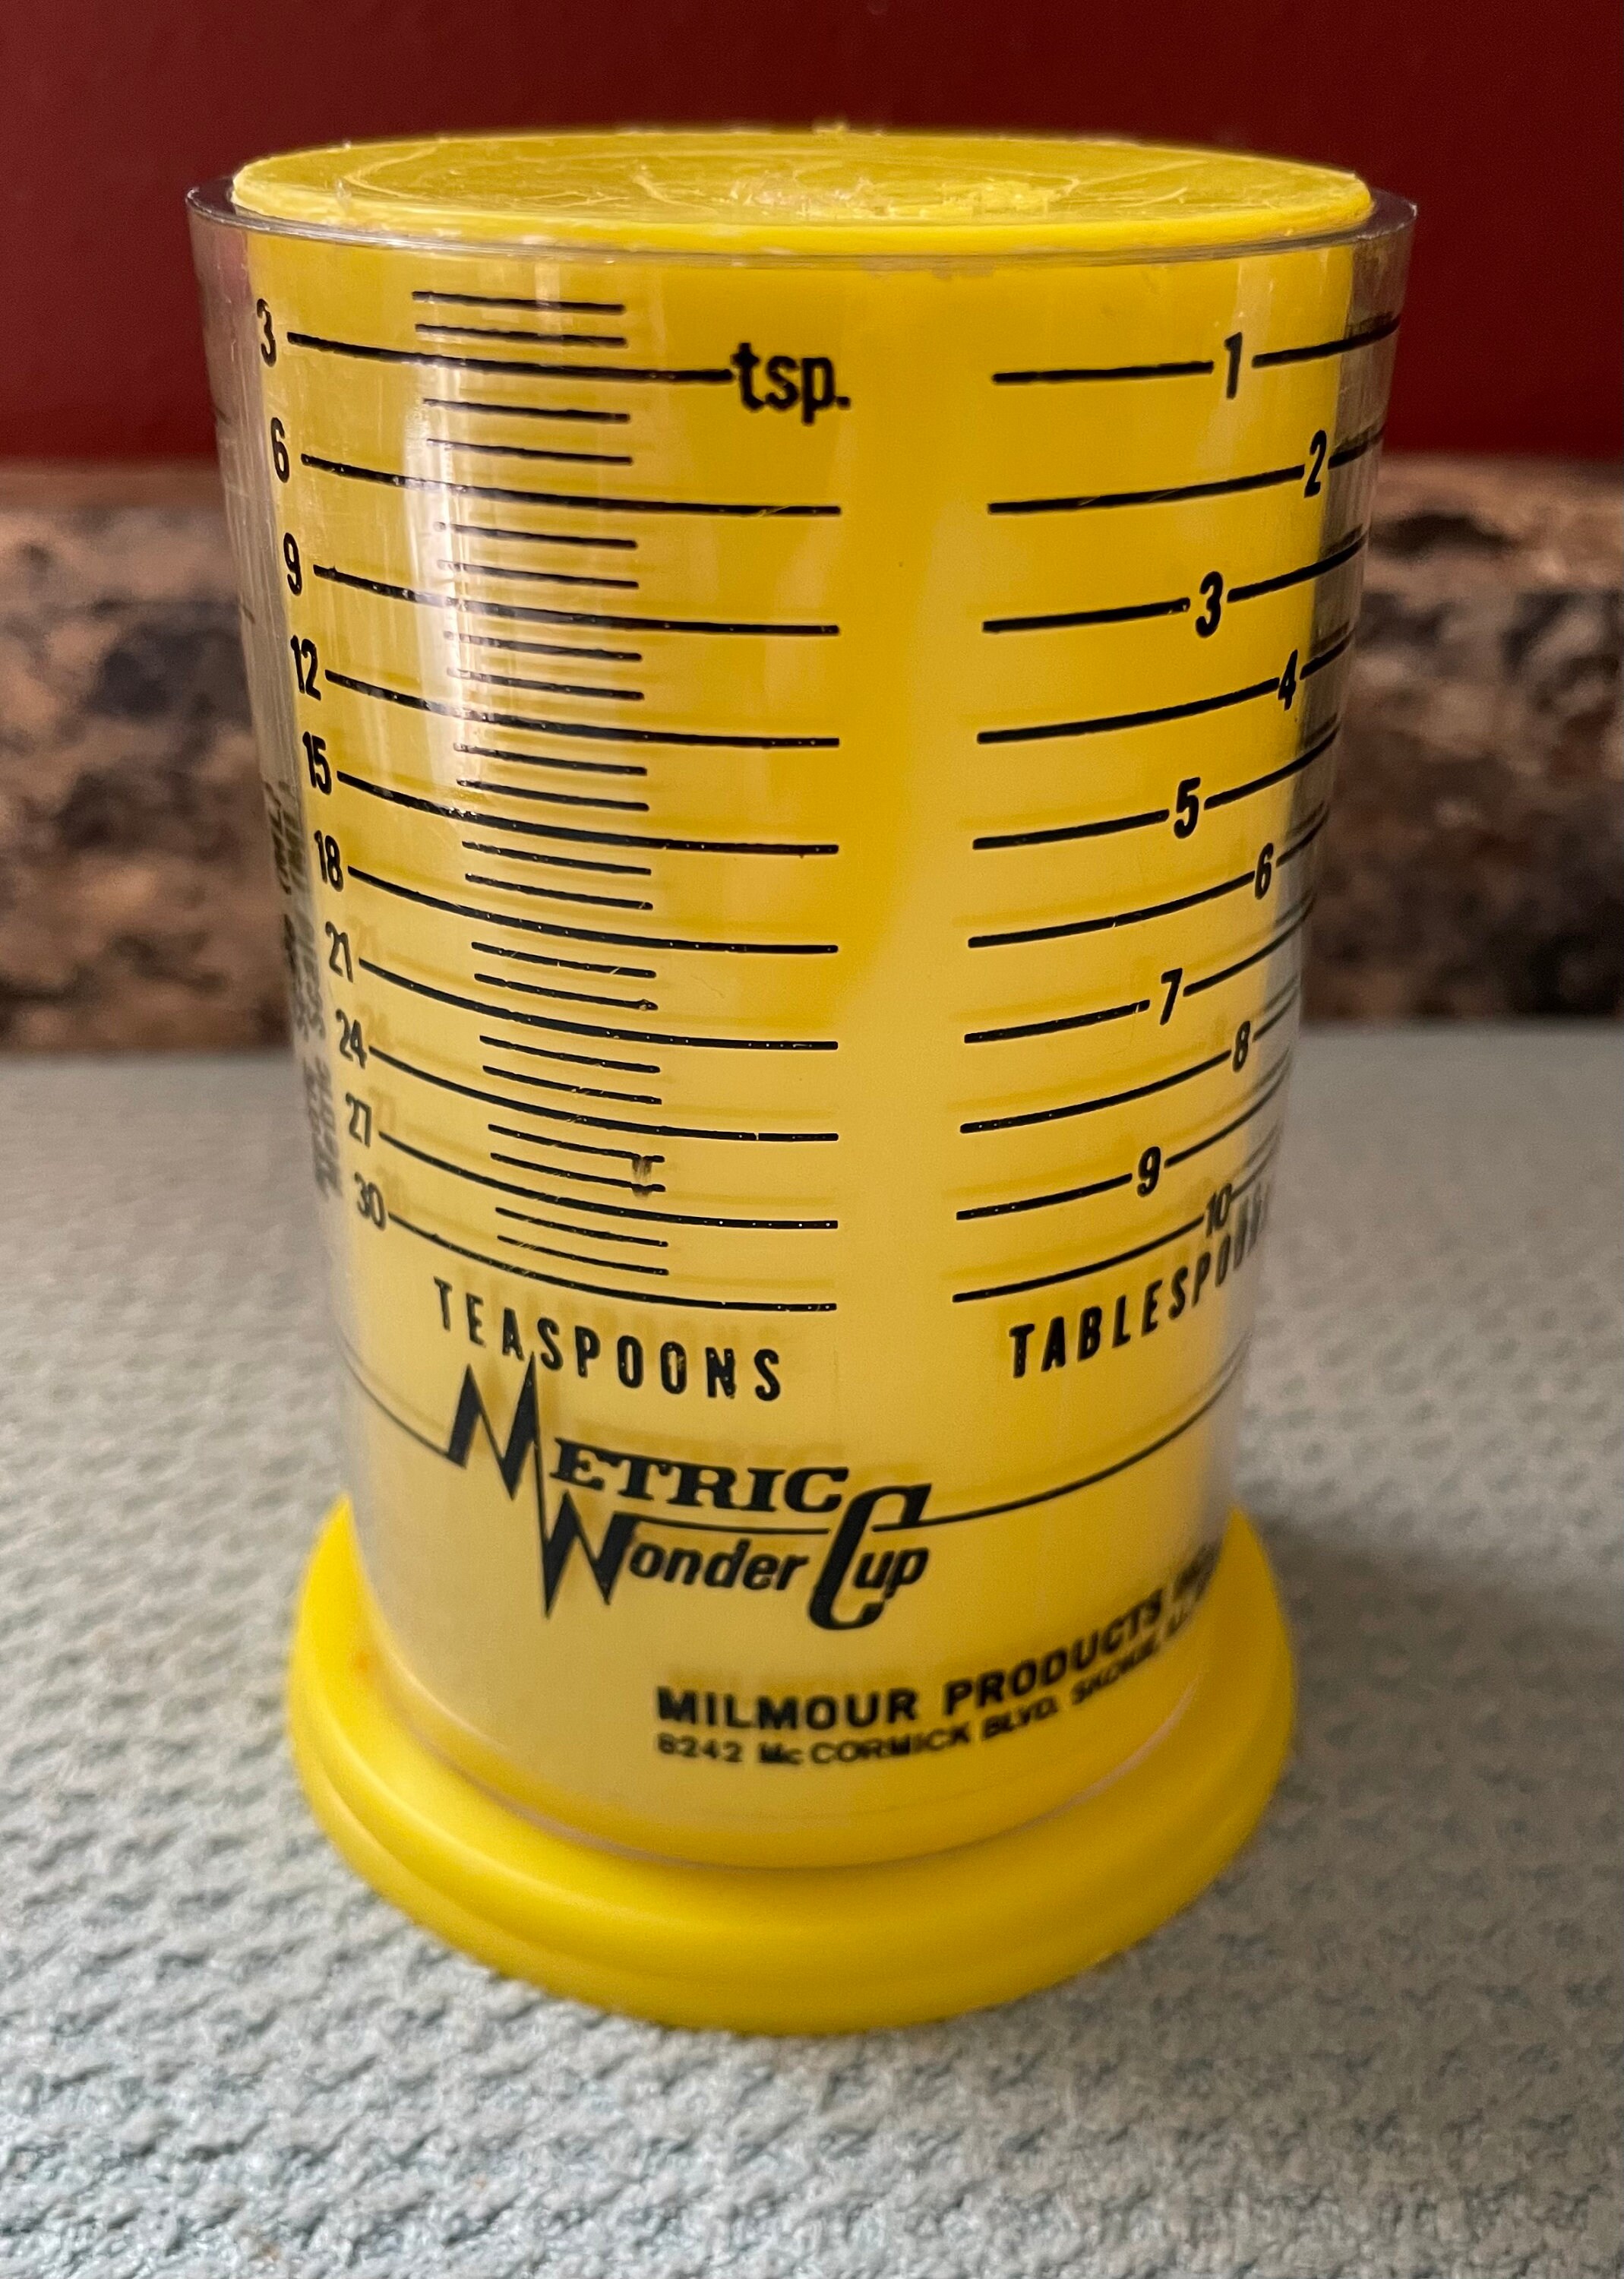 Vintage Milmour Products - Metric Wonder Cup - Measuring Cup Wet/Dry Measure  USA